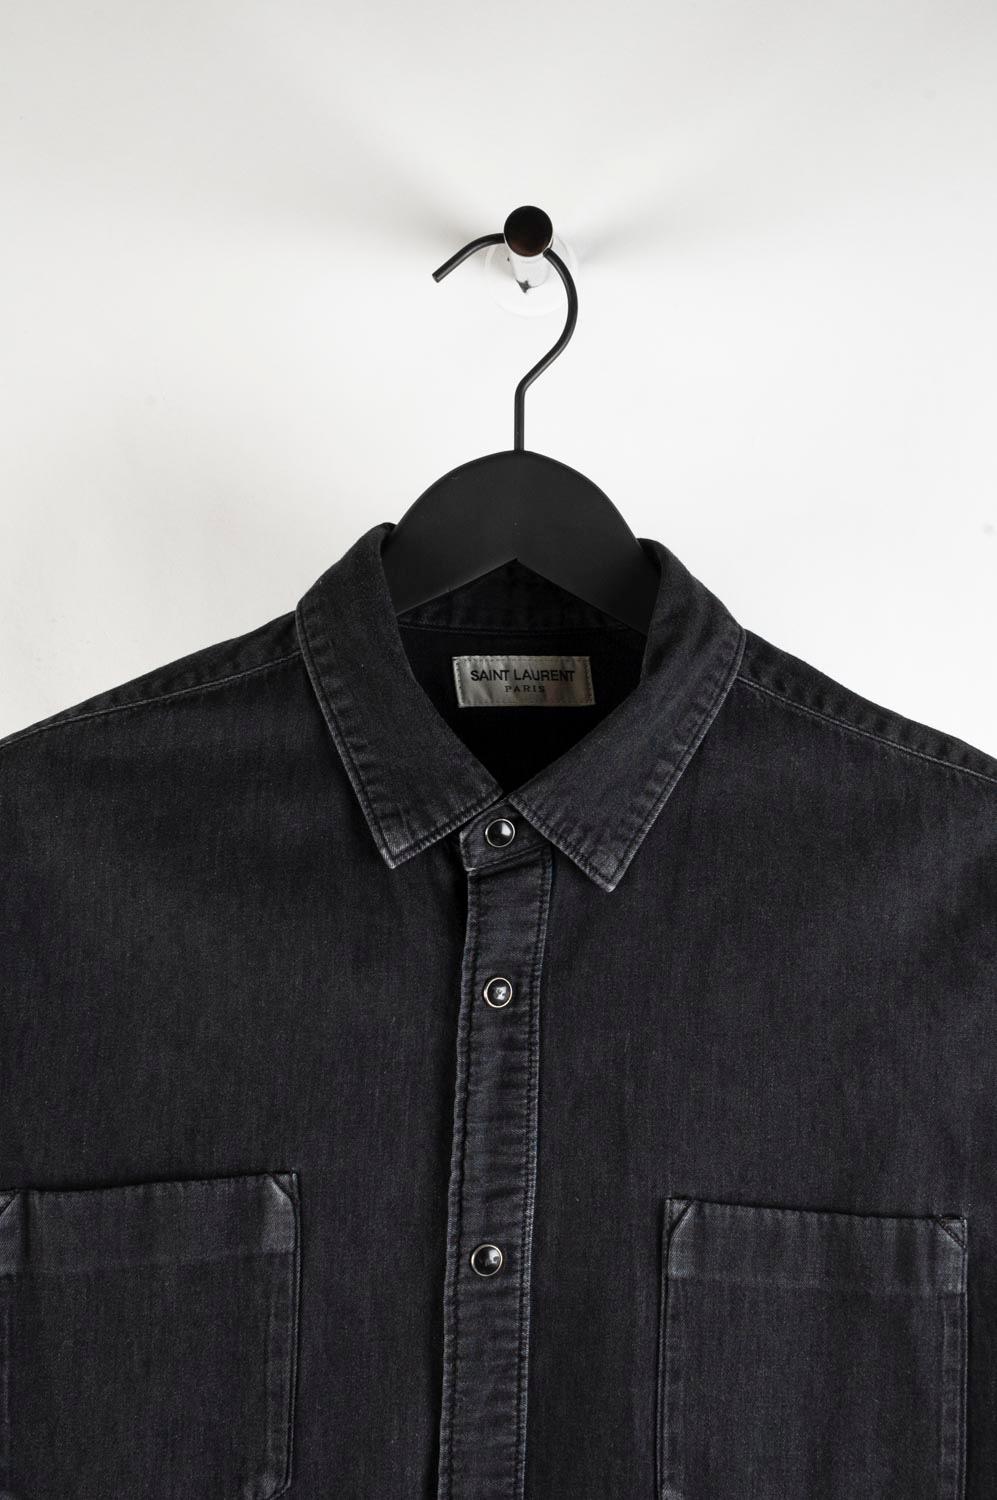 Item for sale is 100% genuine Saint Laurent Men Denim Shirt, S473
Color: grey
(An actual color may a bit vary due to individual computer screen interpretation)
Material: 100% cotton
Tag size: M 
This shirt is great quality item. Rate 8 of 10, good